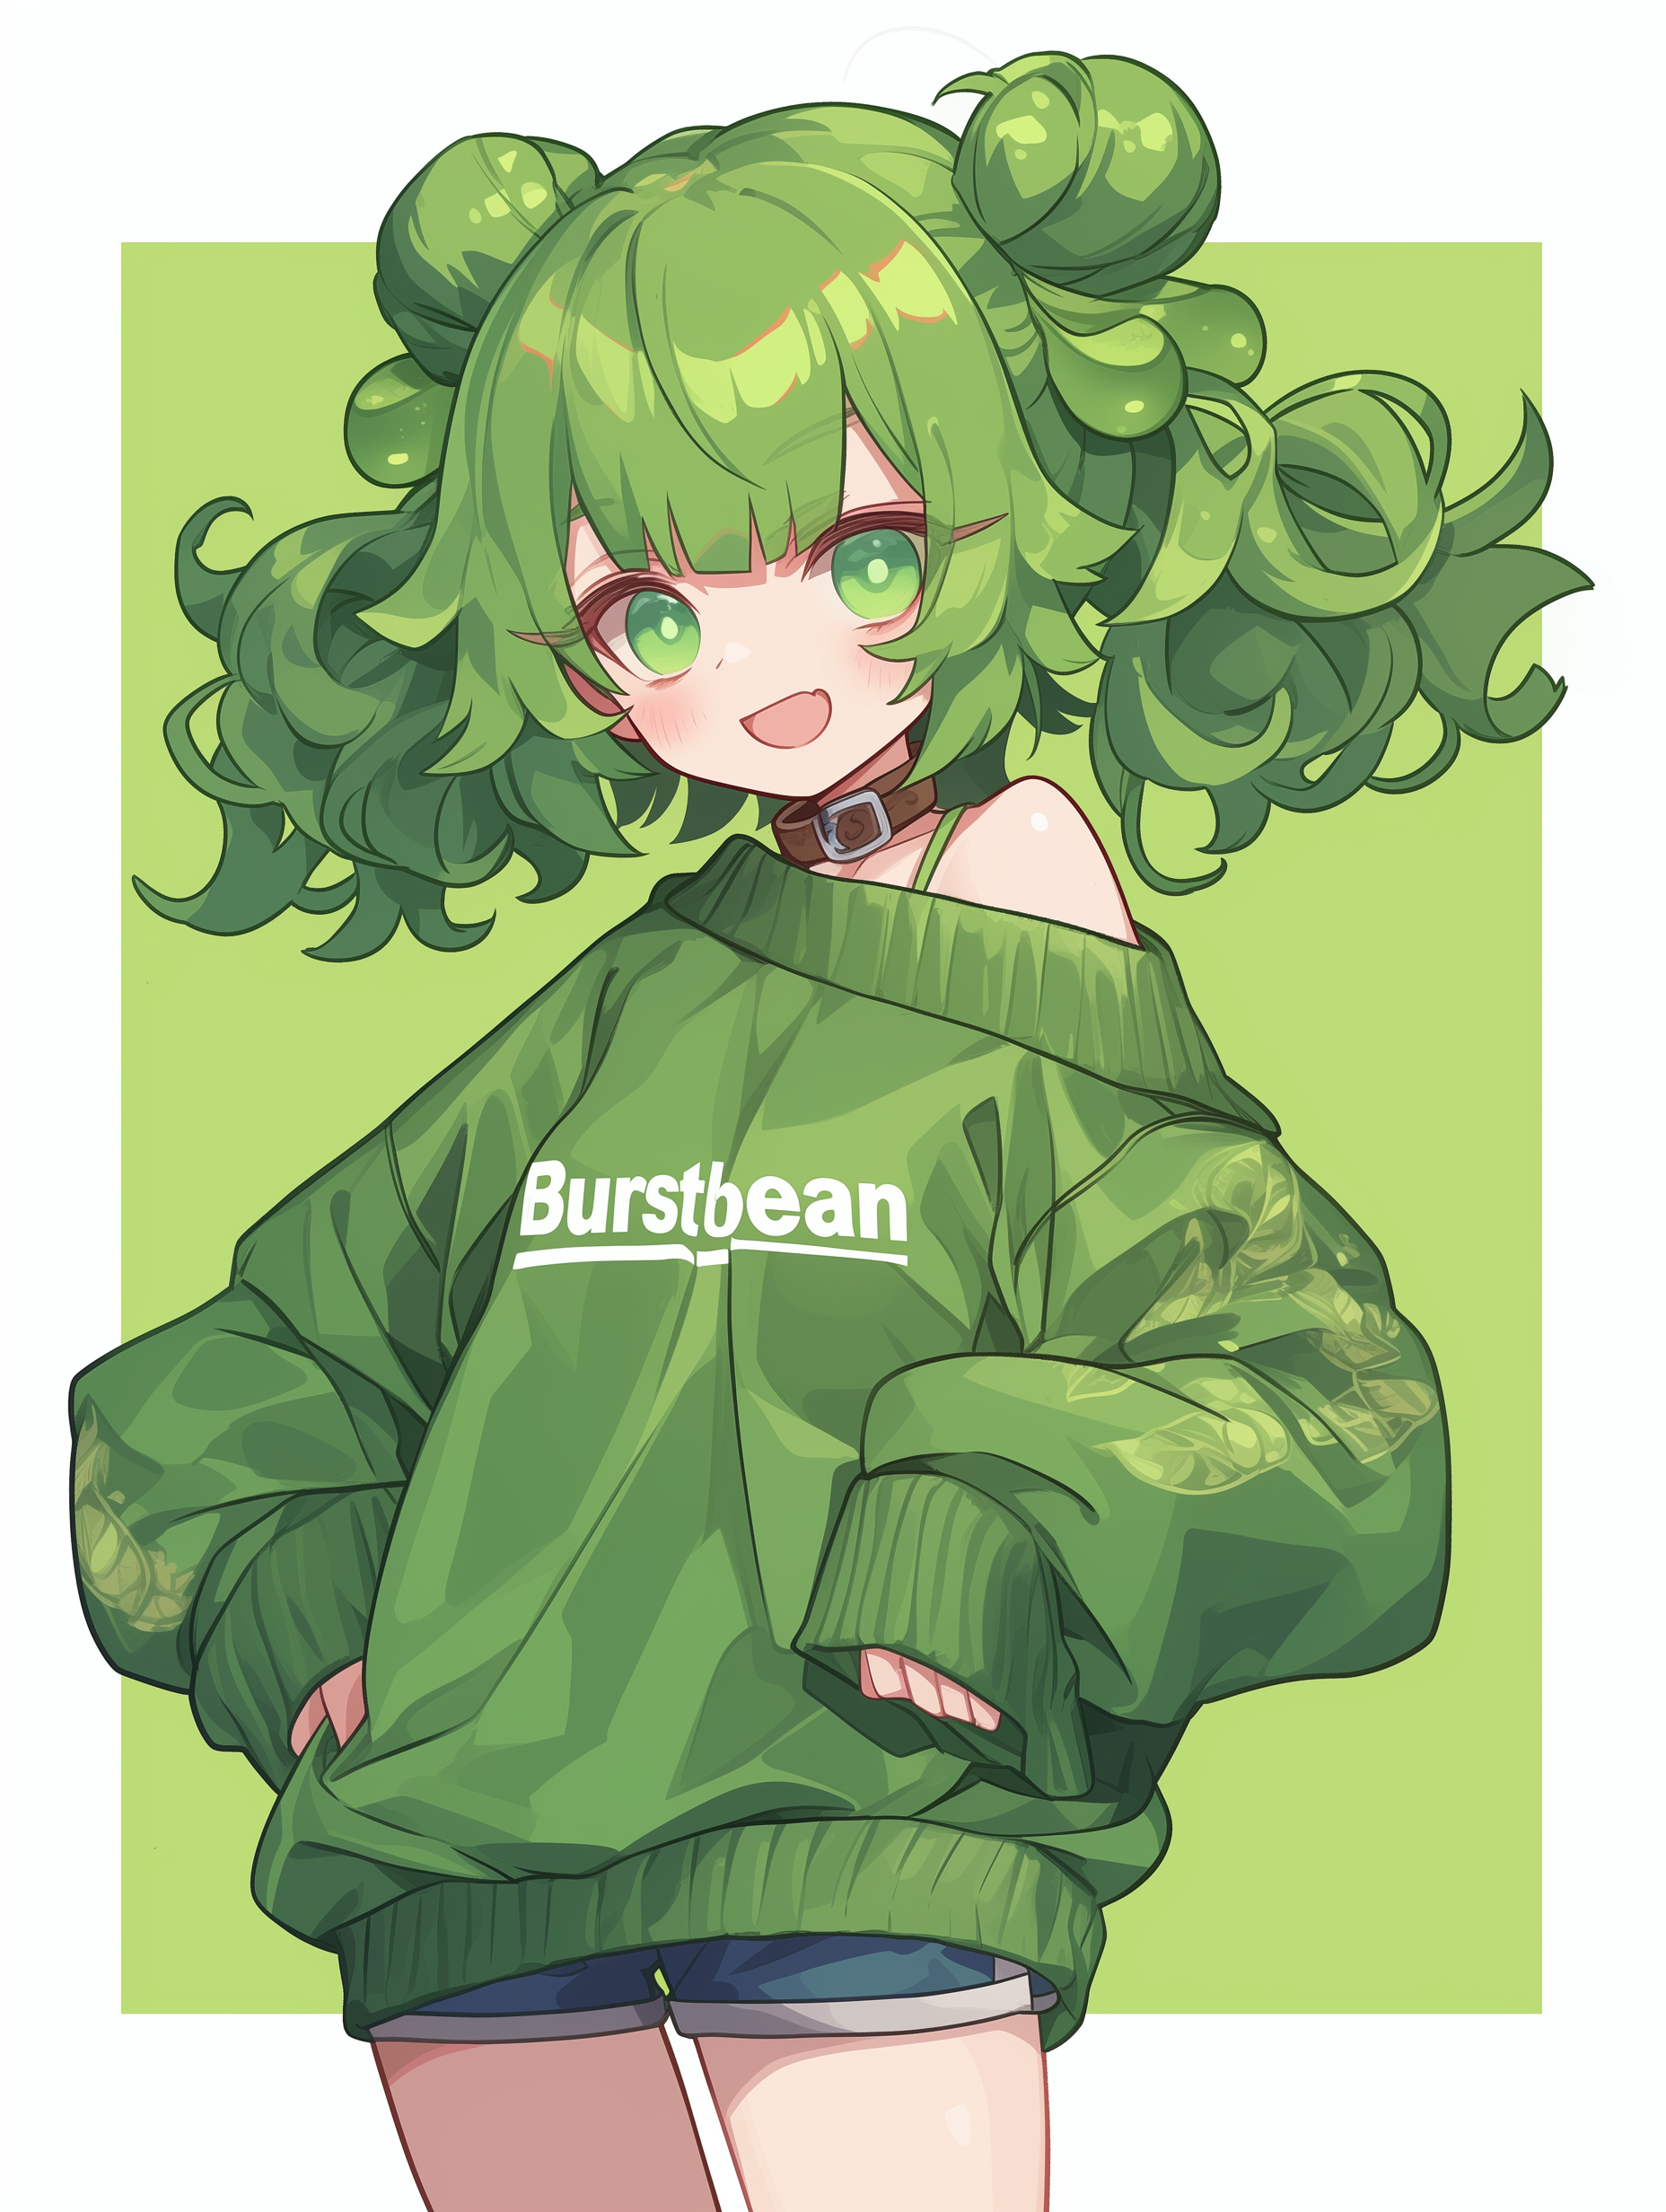 rlyehsexplorers_A_juvenile_plant_girl_with_green_hair_wearing_g_ca6accab-0b2b-41a7-9746-45ae8855a3ab.png